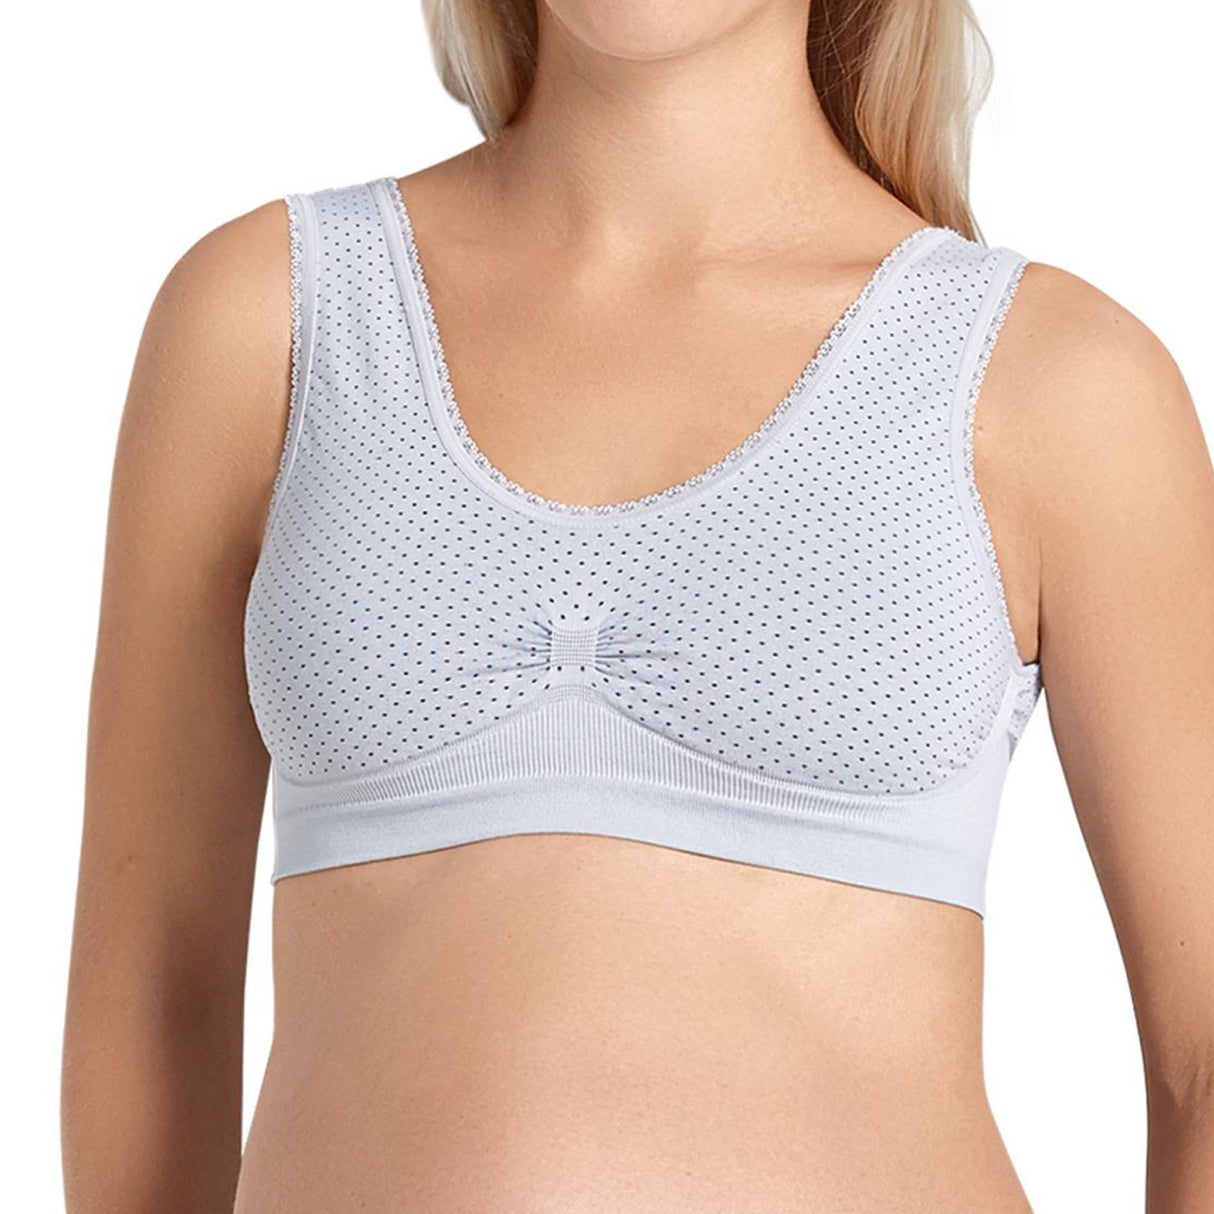 SEAMLESS, maternity bra, without wires